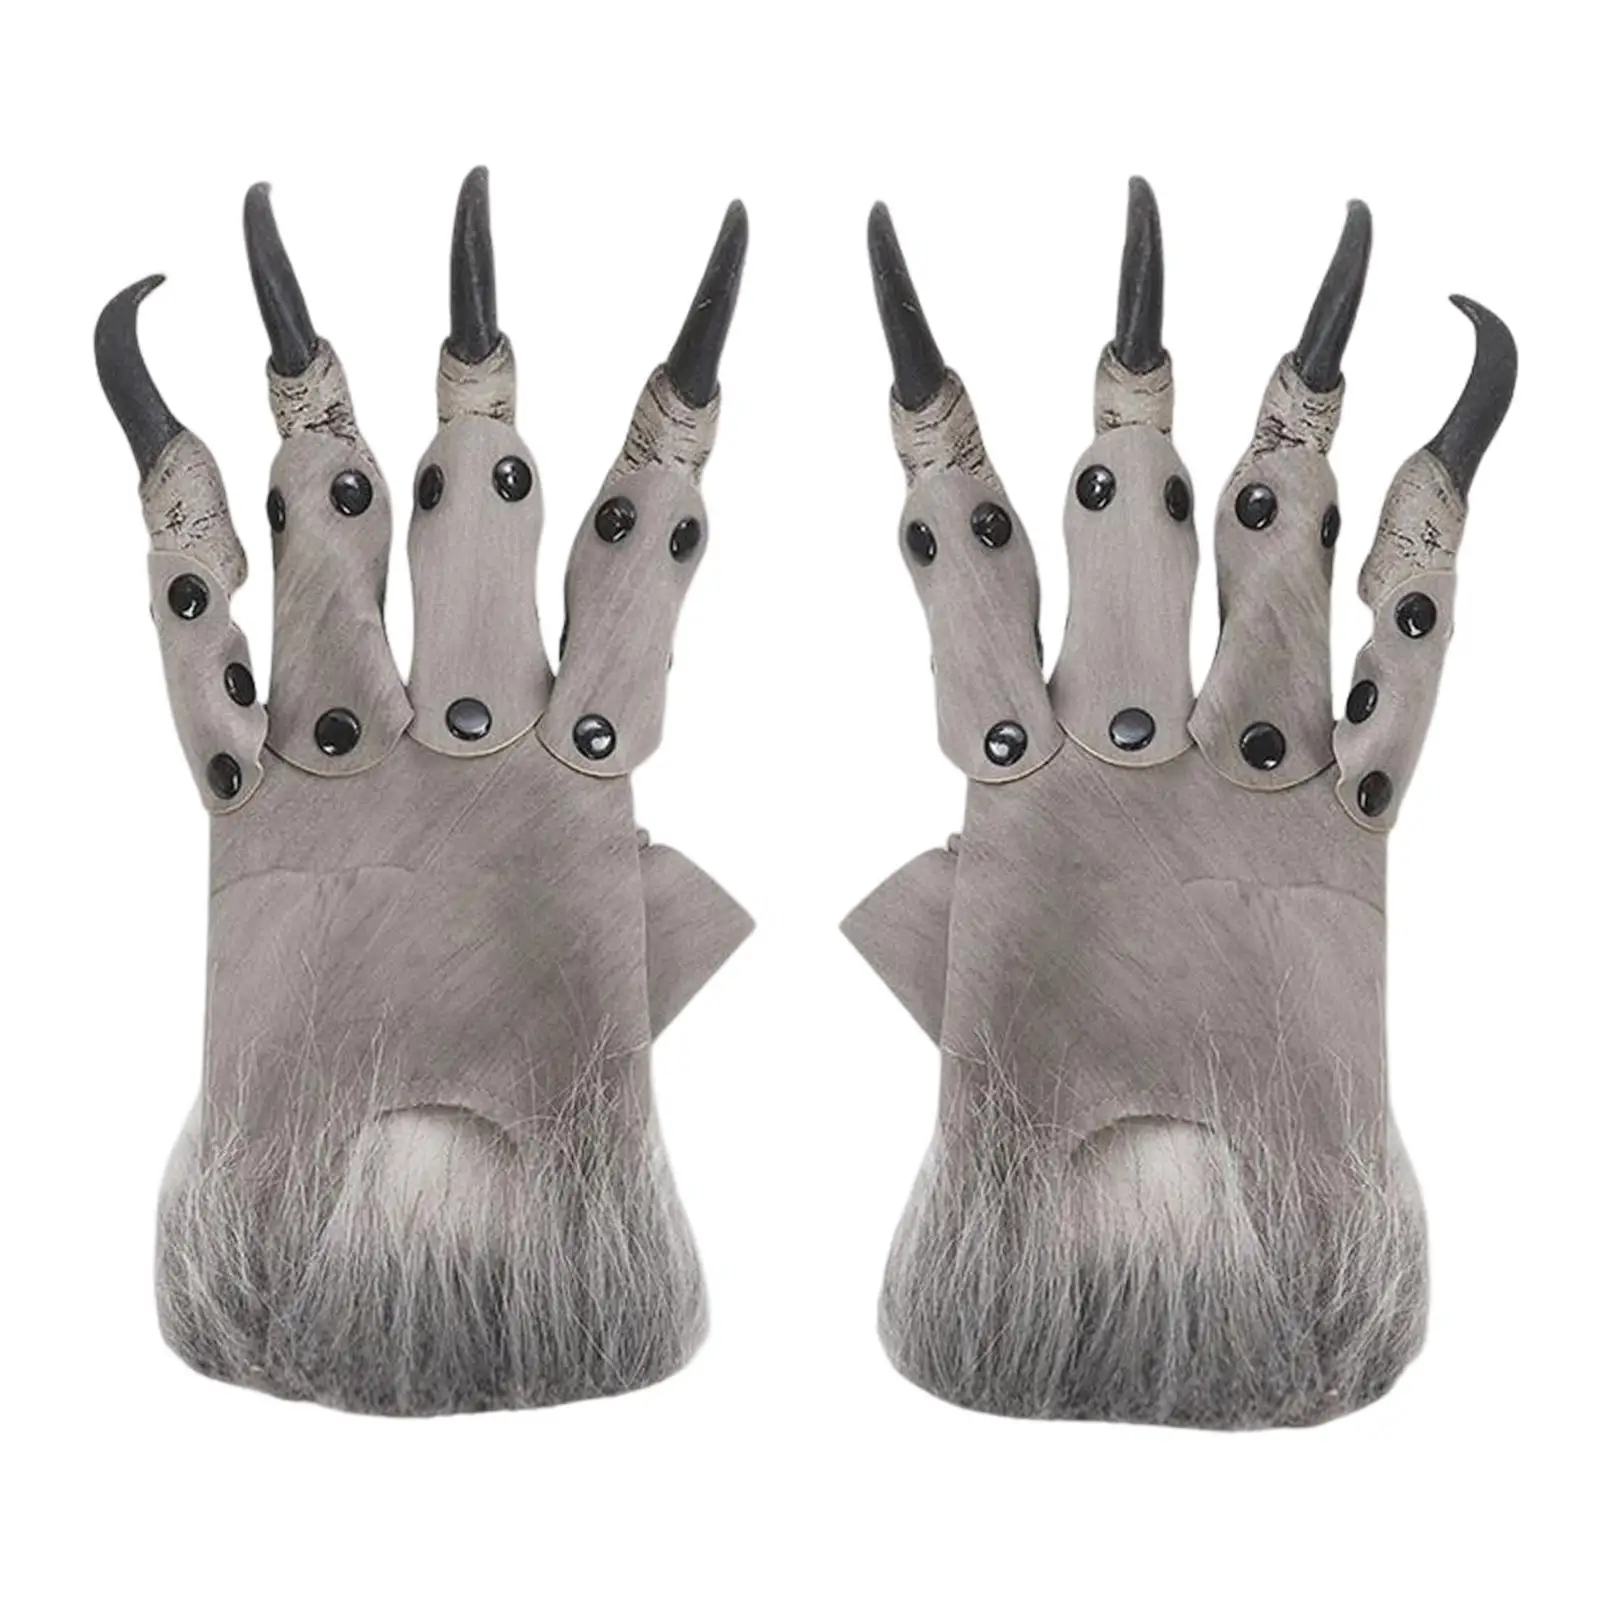 Creepy Halloween Dragon Glove Costume Claw Fancy Dress Easter Accessories